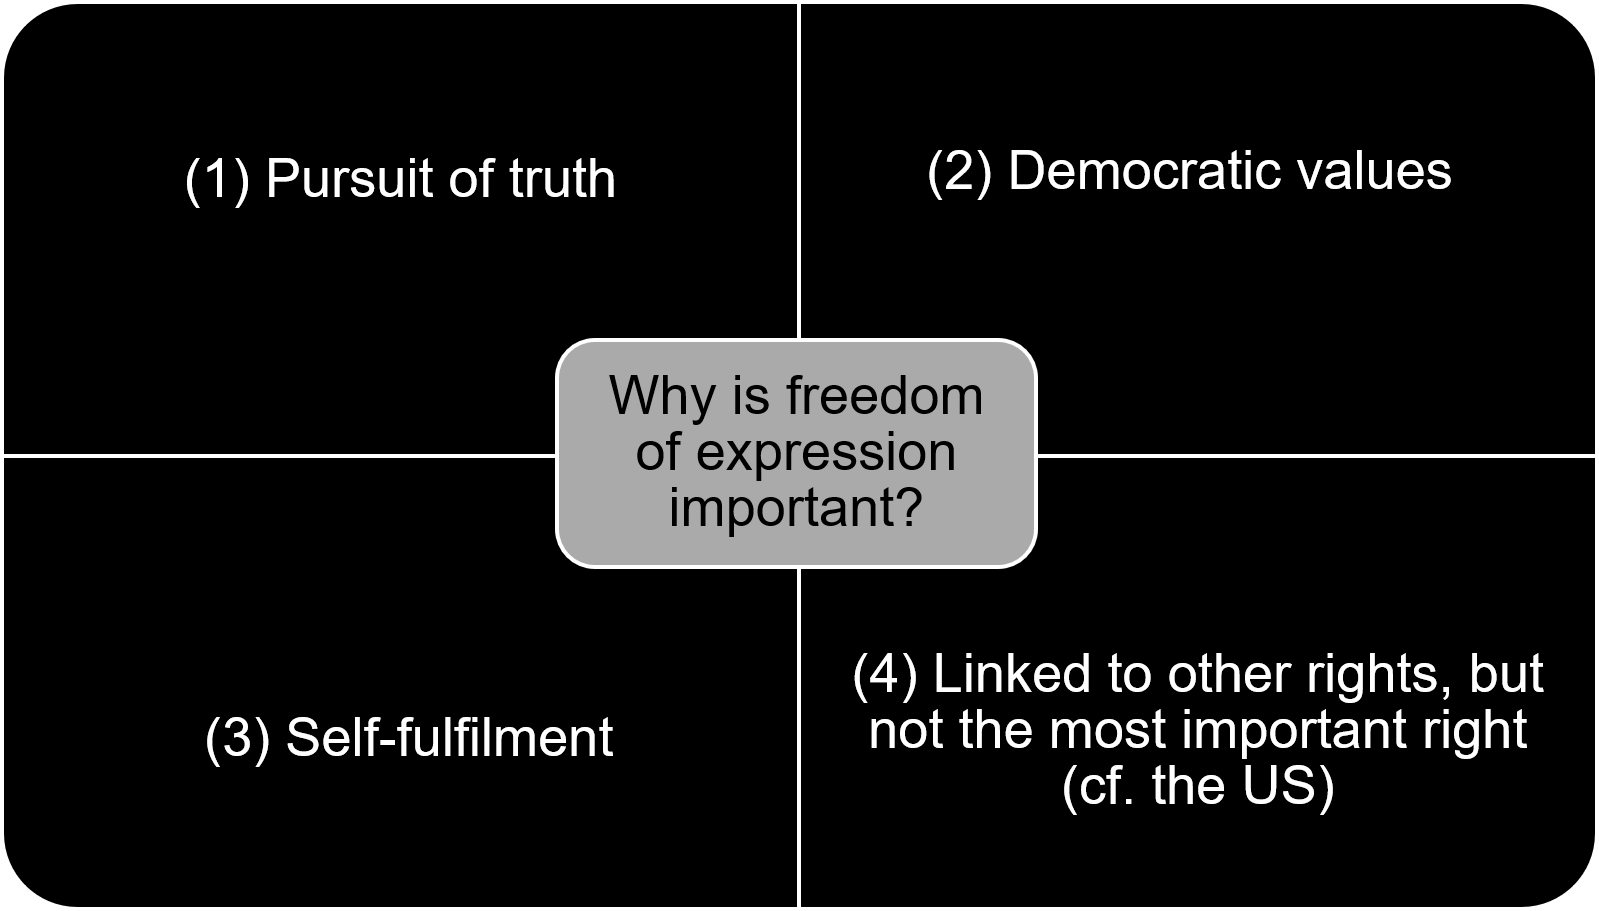 The following diagram illustrates the four points substantiating why freedom of expression is important.The first point being the pursuit of truth.The second point being democratic values.The third point being self-fulfilment.The fourth point being that freedom of expression is linked to other rights, but not the most important right. (Compare this position to the position followed in the United States).